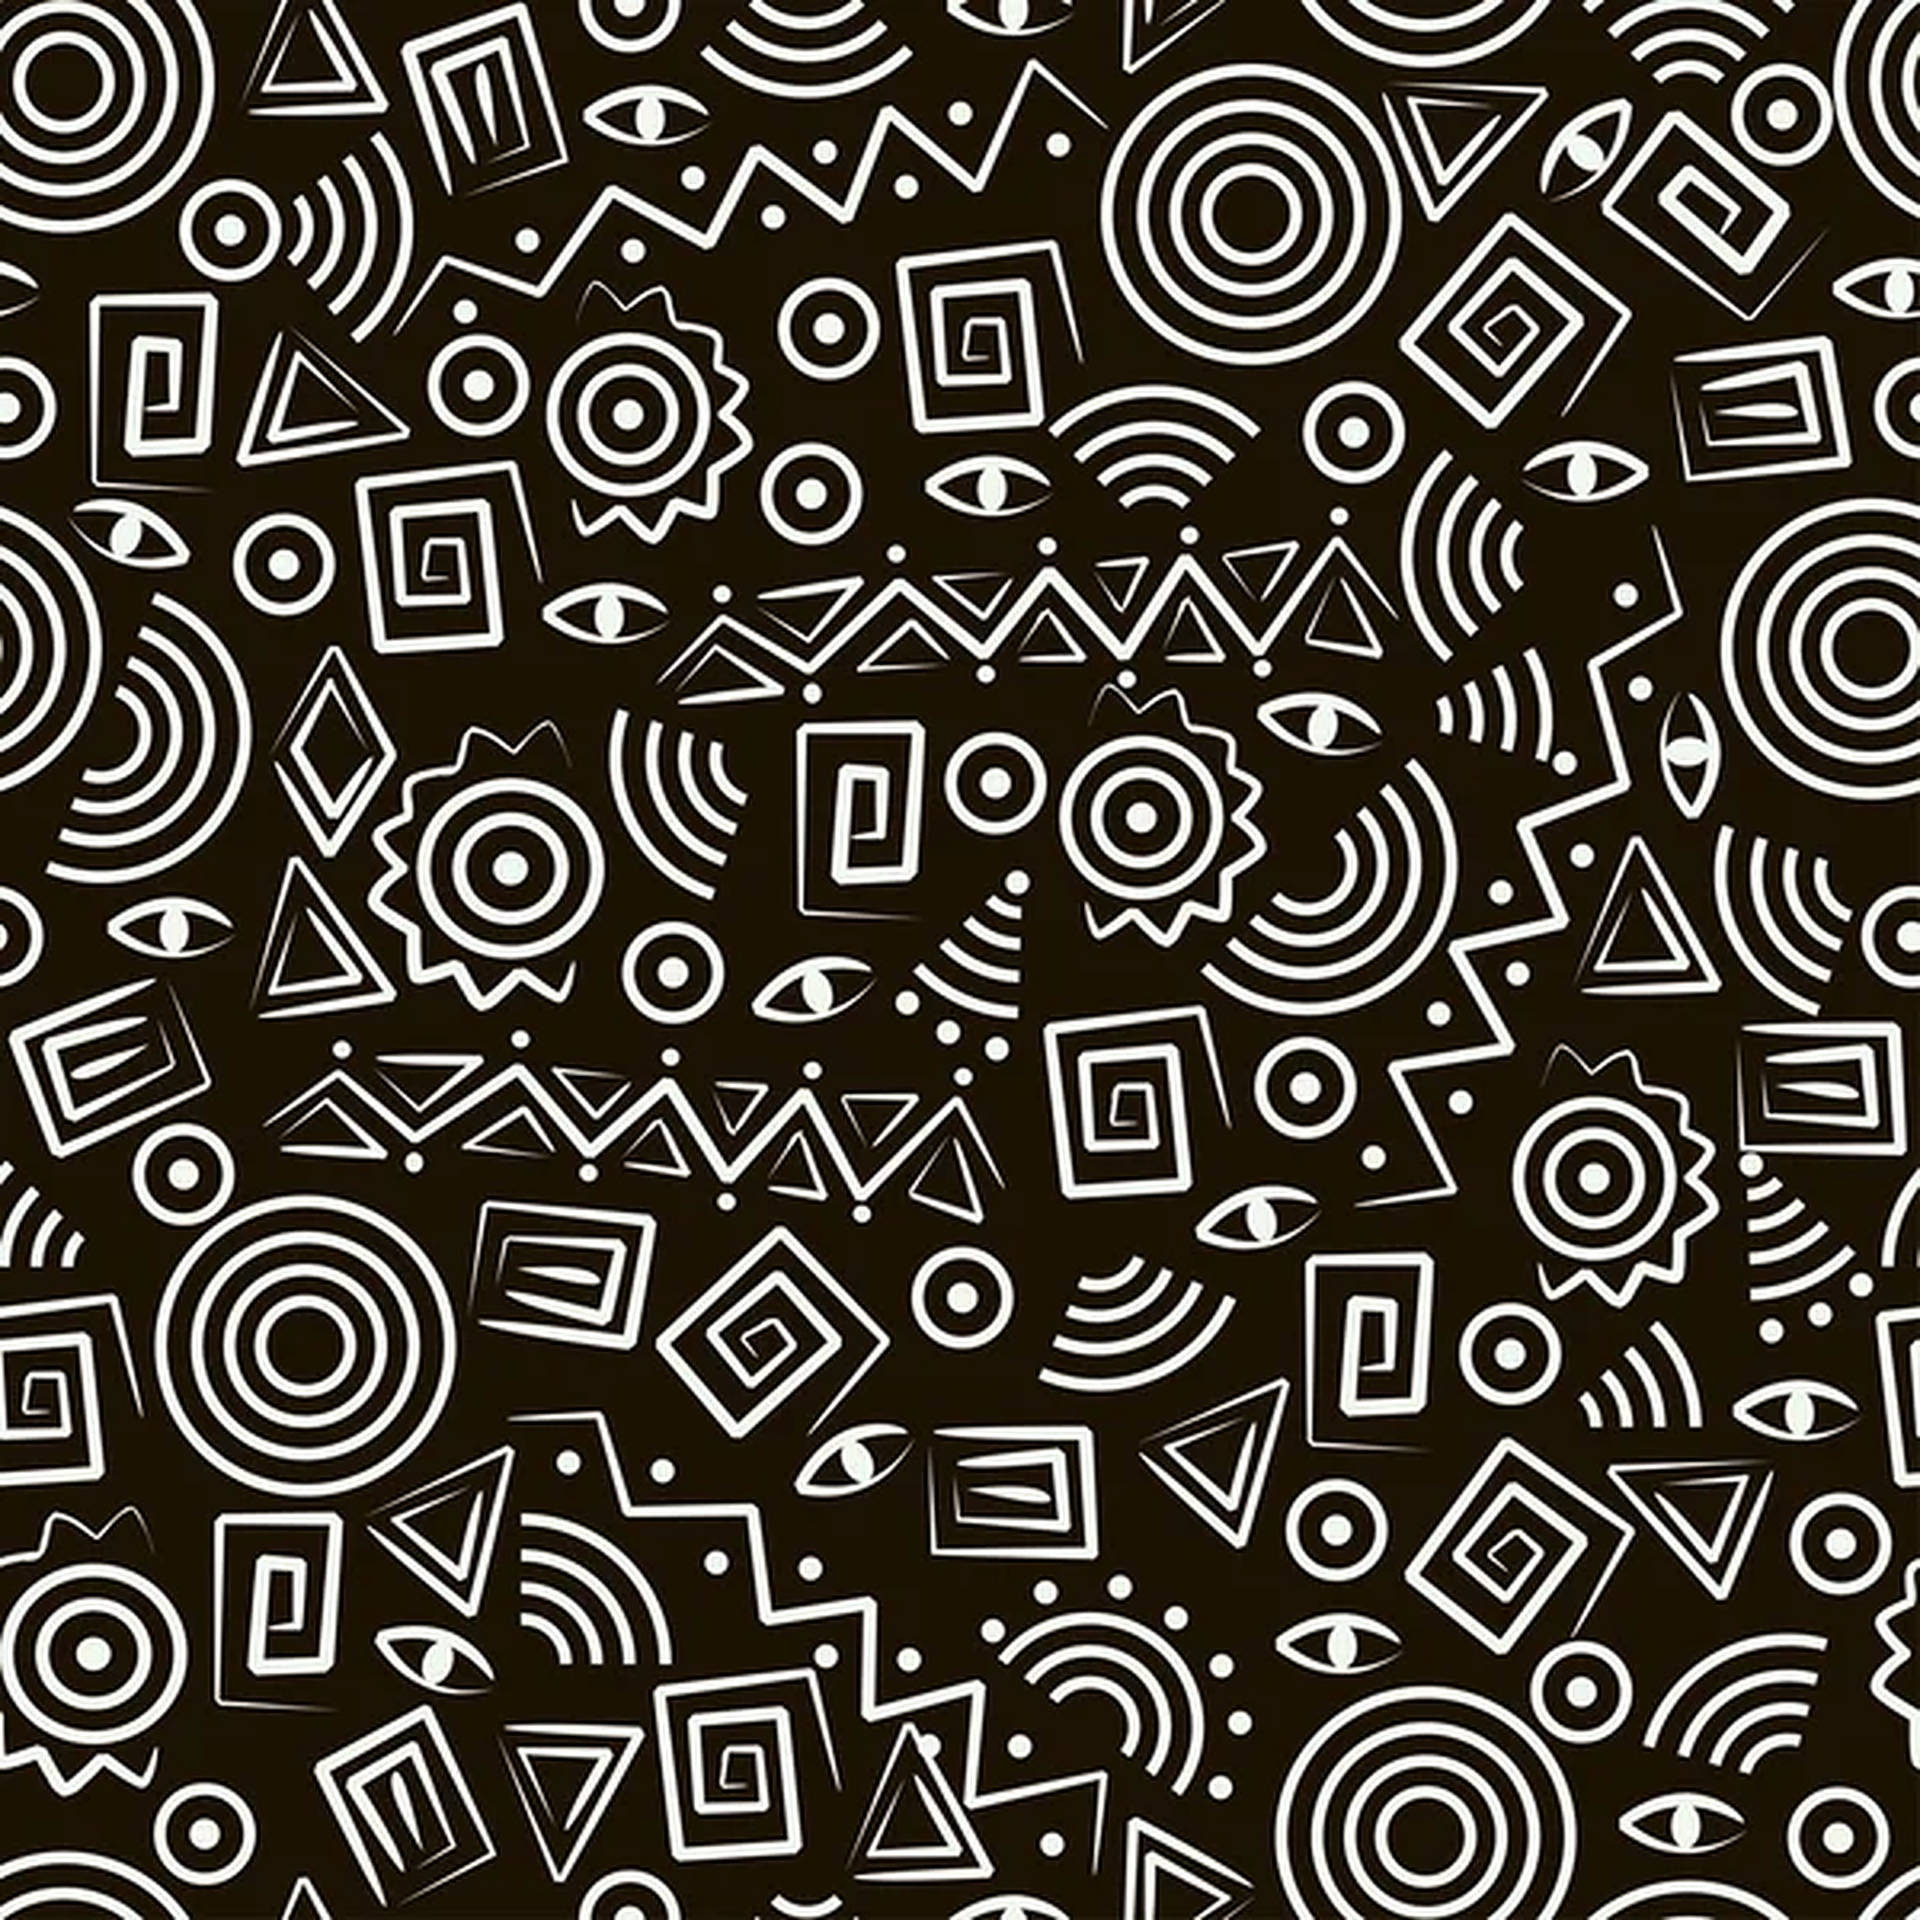 Download Captivating Monochrome Tribal Pattern Wallpaper | Wallpapers.com